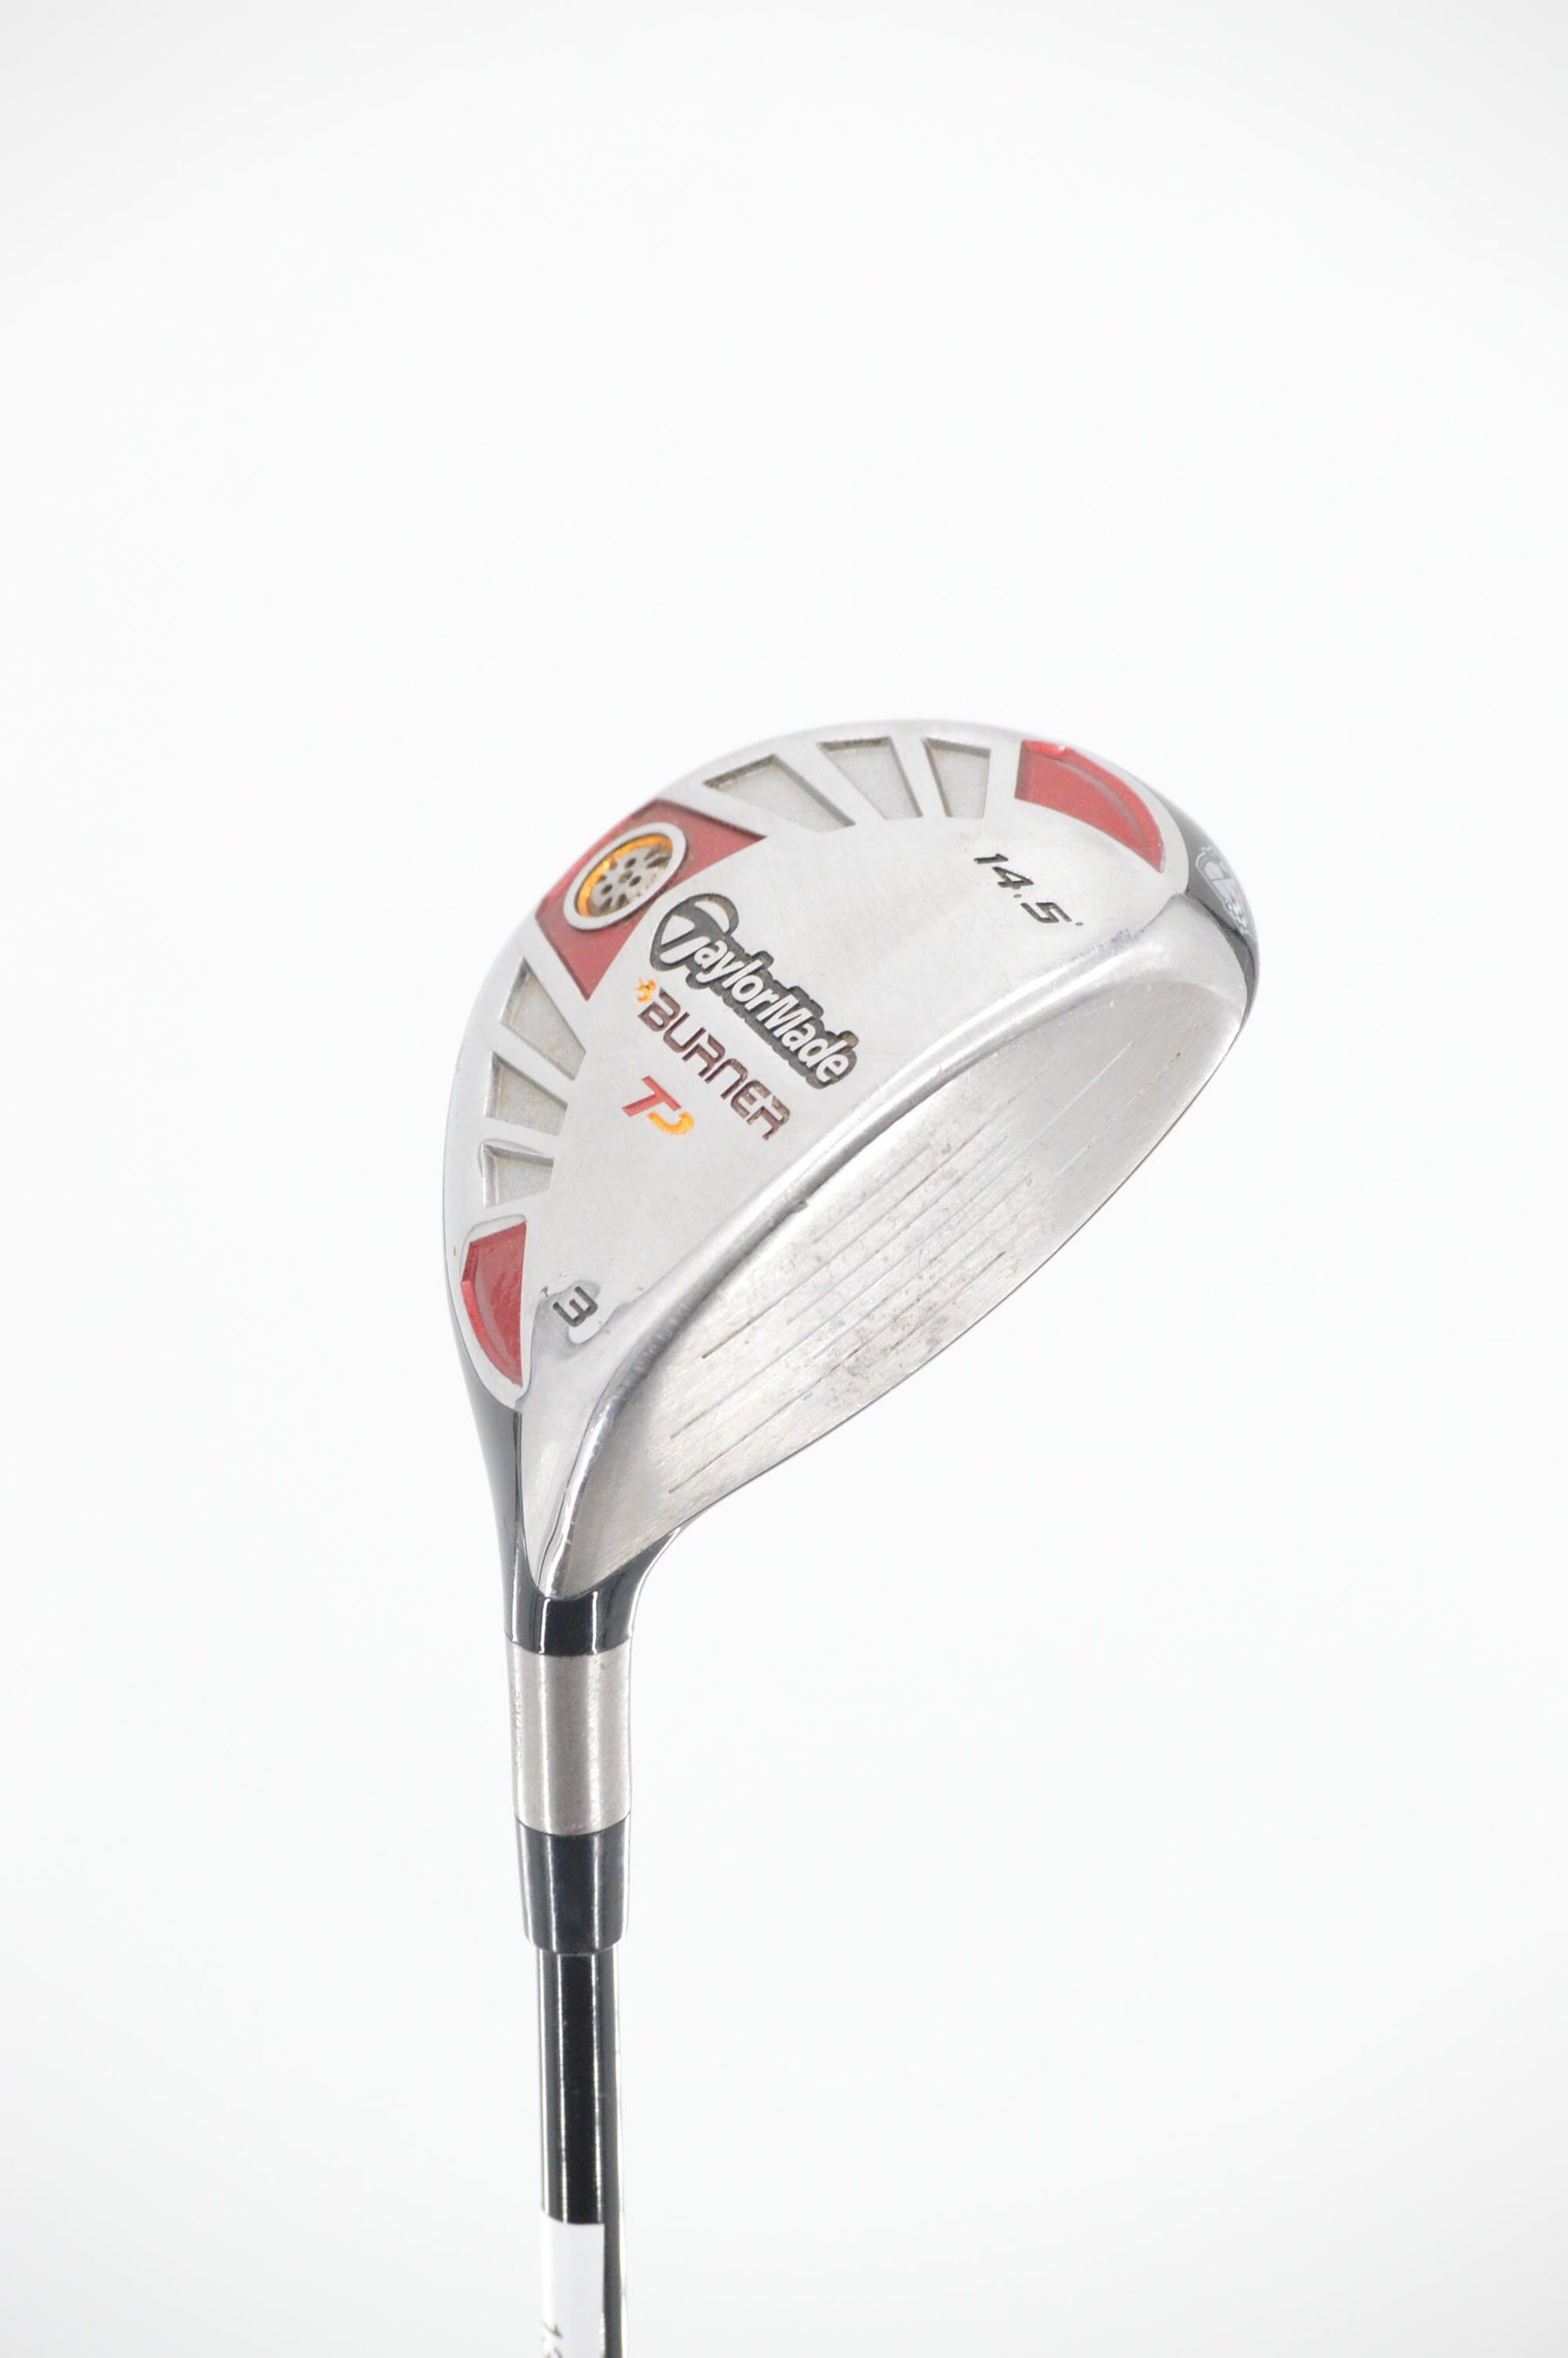 TaylorMade Tour Preferred Burner 3 Wood S Flex Golf Clubs GolfRoots 